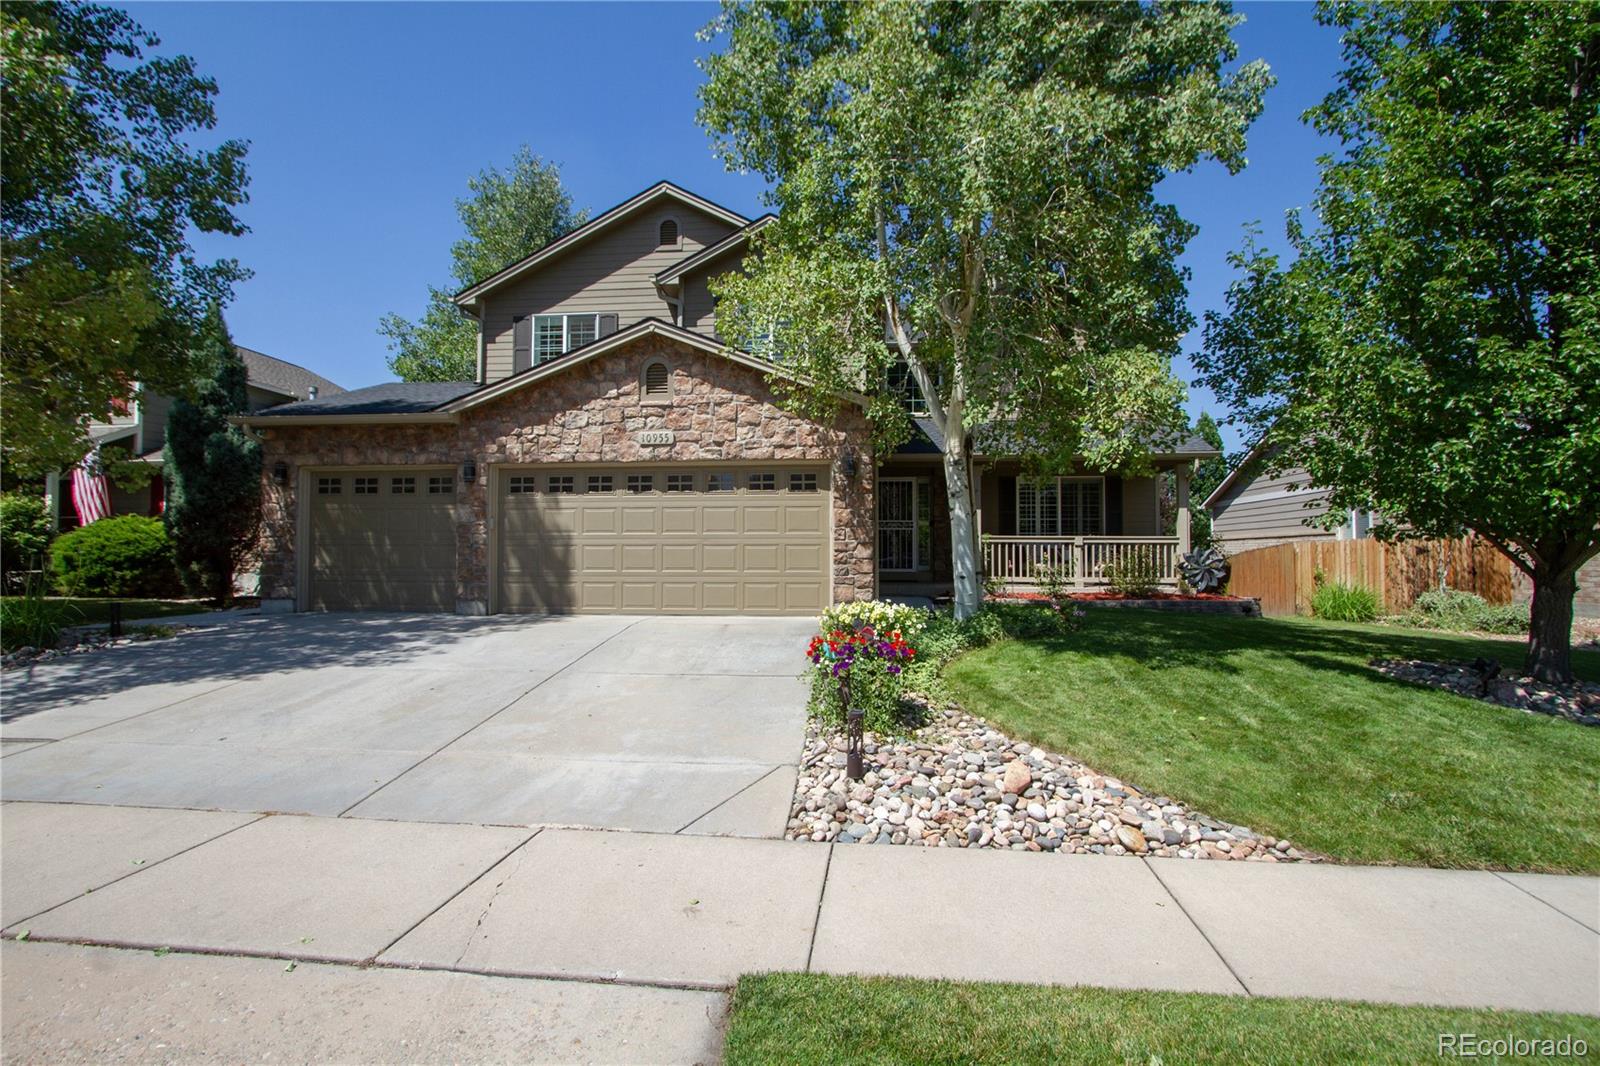 10955 w 54th lane, Arvada sold home. Closed on 2024-04-10 for $950,000.